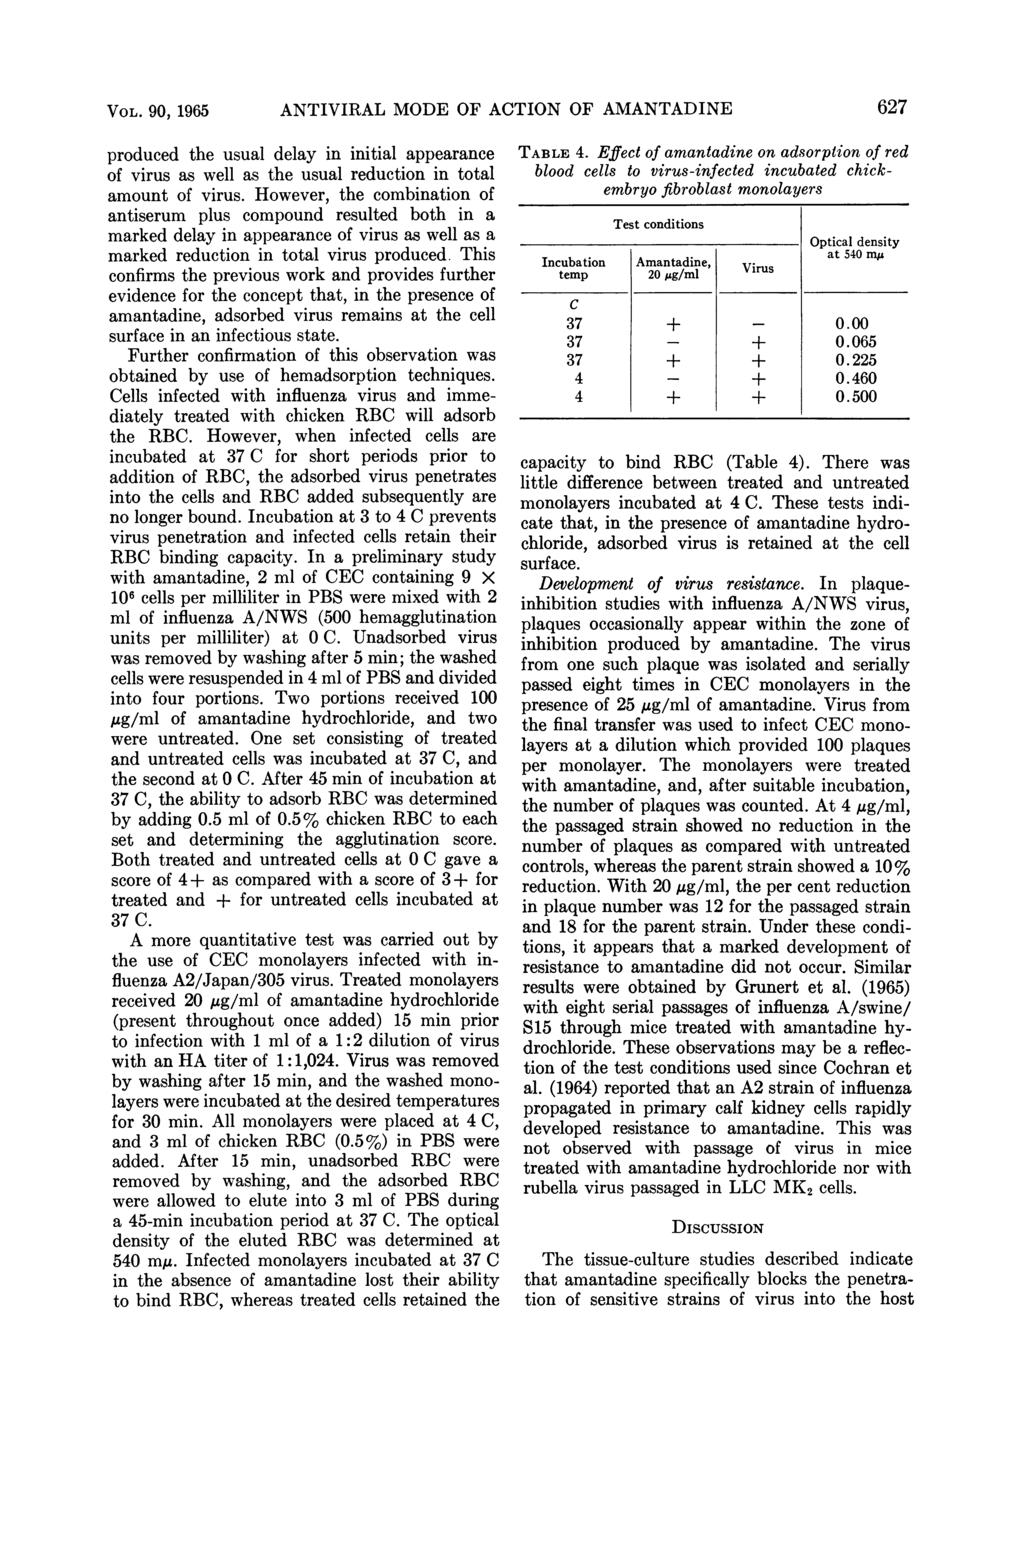 VOL. 90, 1965 ANTIVIRAL MODE OF ACTION OF AMANTADINE produced the usual delay in initial appearance of virus as well as the usual reduction in total amount of virus.